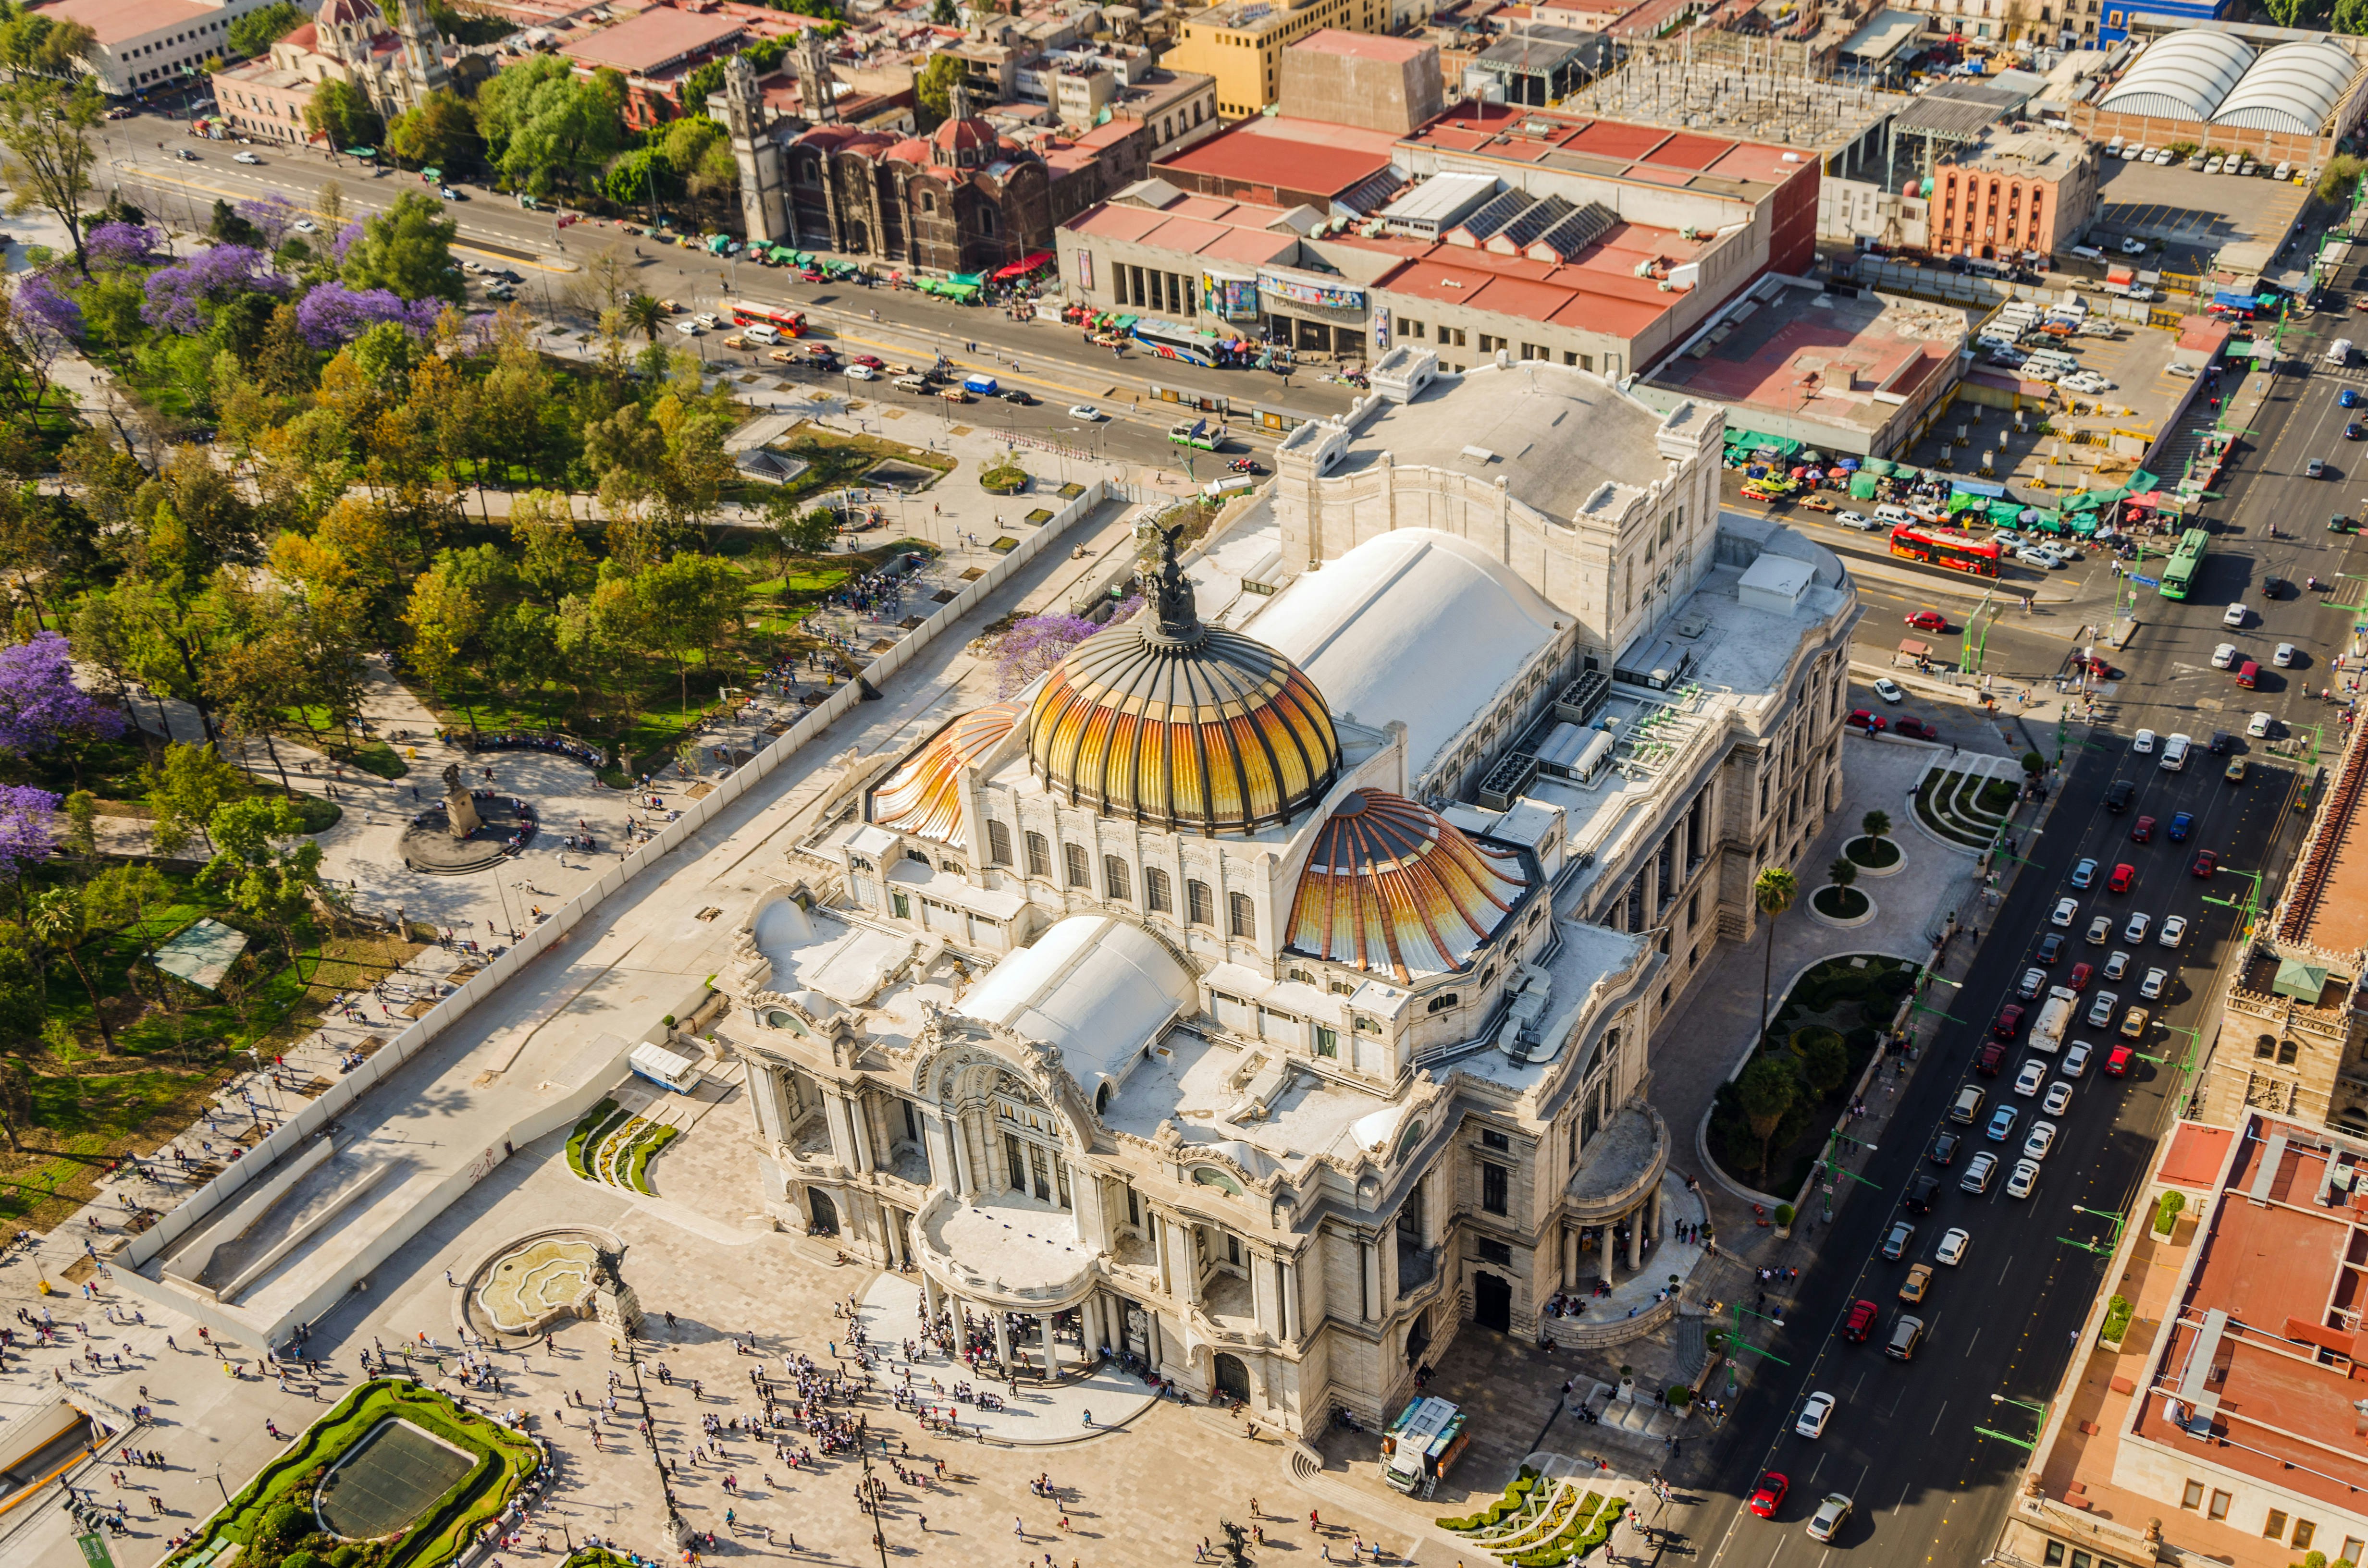 An aerial view of Mexico City's Fine Arts Museum, a grand building with a domed ceiling, which is surrounded by busy streets.